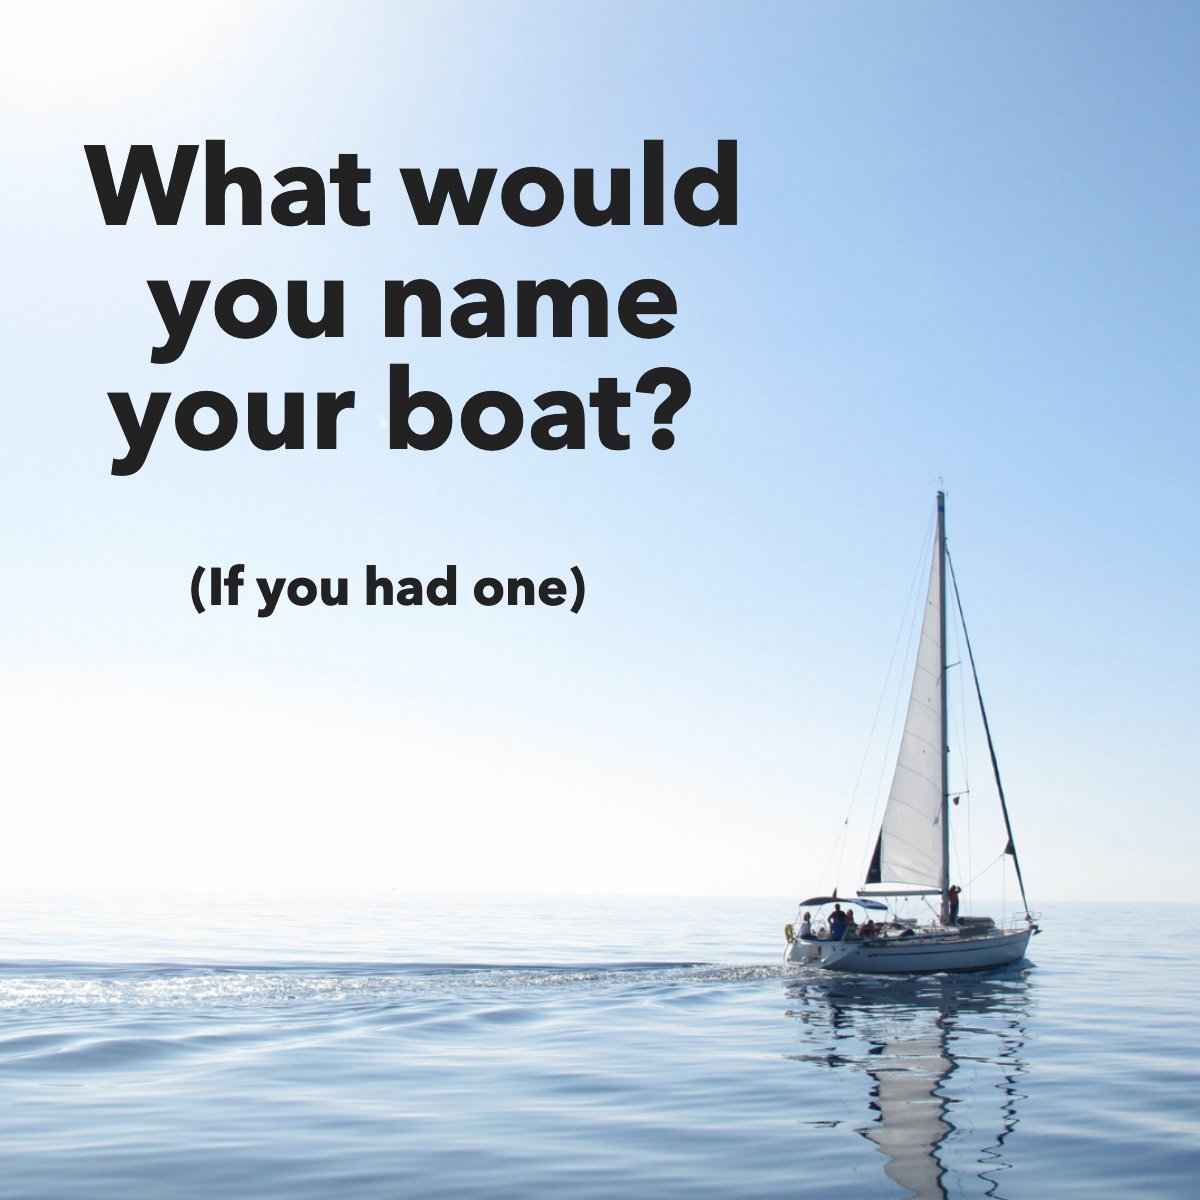 Naming boats after famous songs, movies, or other cultural arts you love is acceptable and entertaining. 😆😉

#boatrip #boatinglife #boats #ocean #searayboats #boatfishing
 #angelagribbinsrealtor #angelagribbinsrealestate #lakenormanrealty